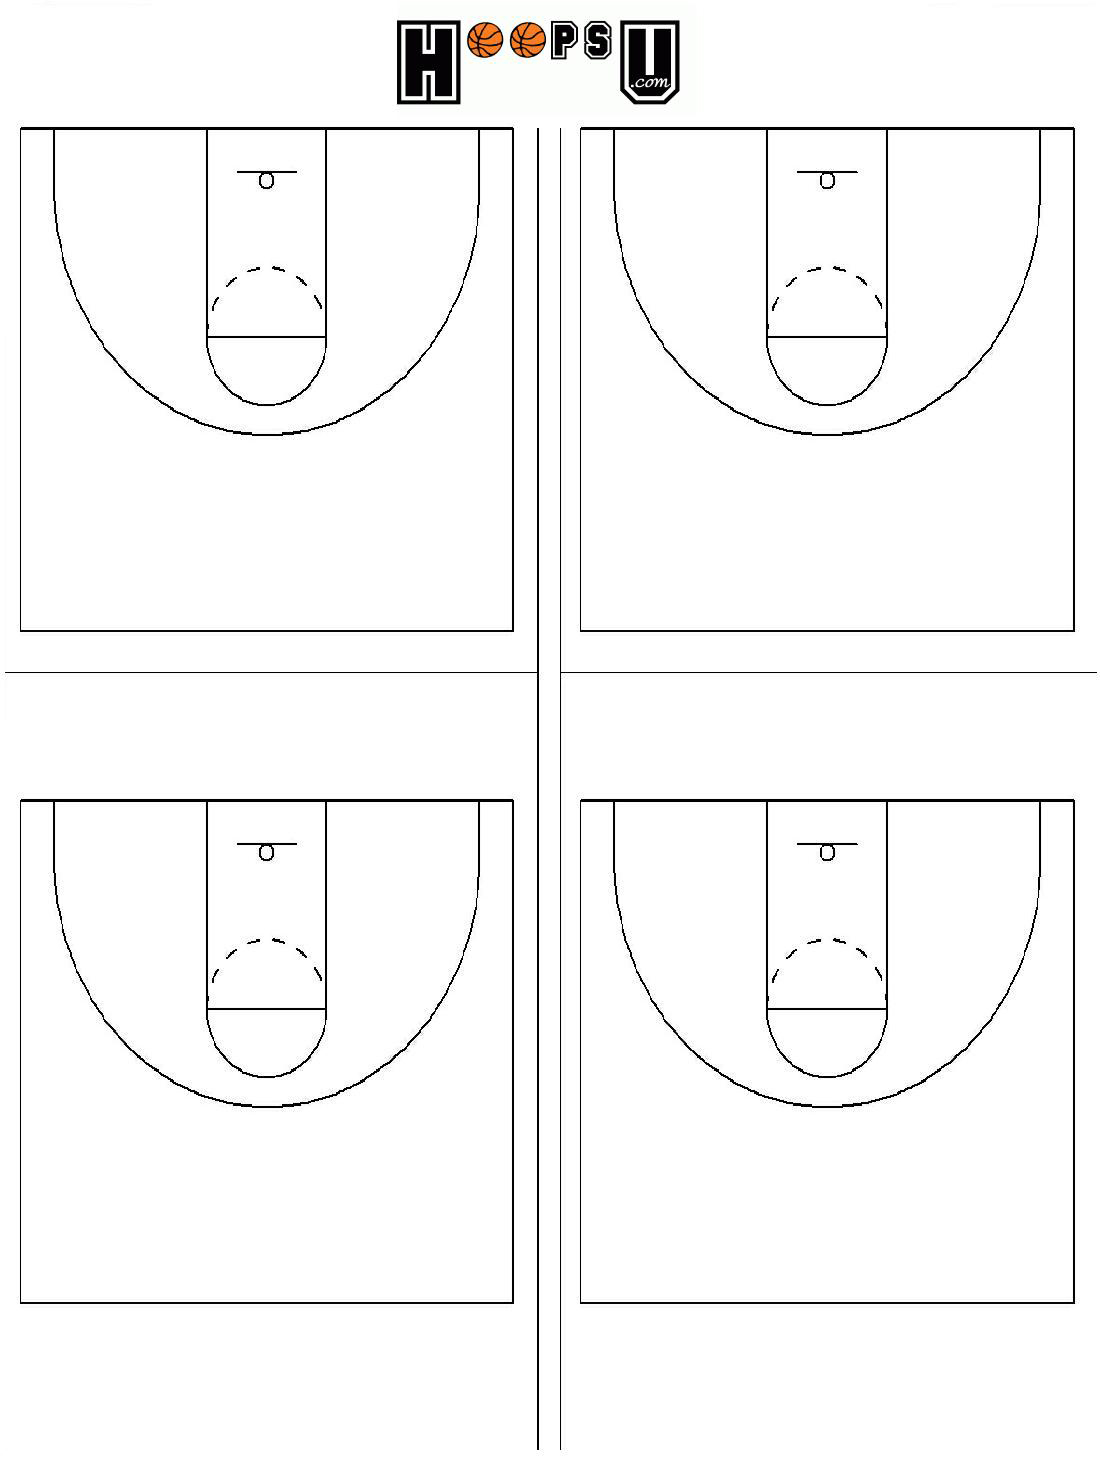 Basketball Court Diagram What Are The Basketball Court Dimensions Diagrams For Court Striping